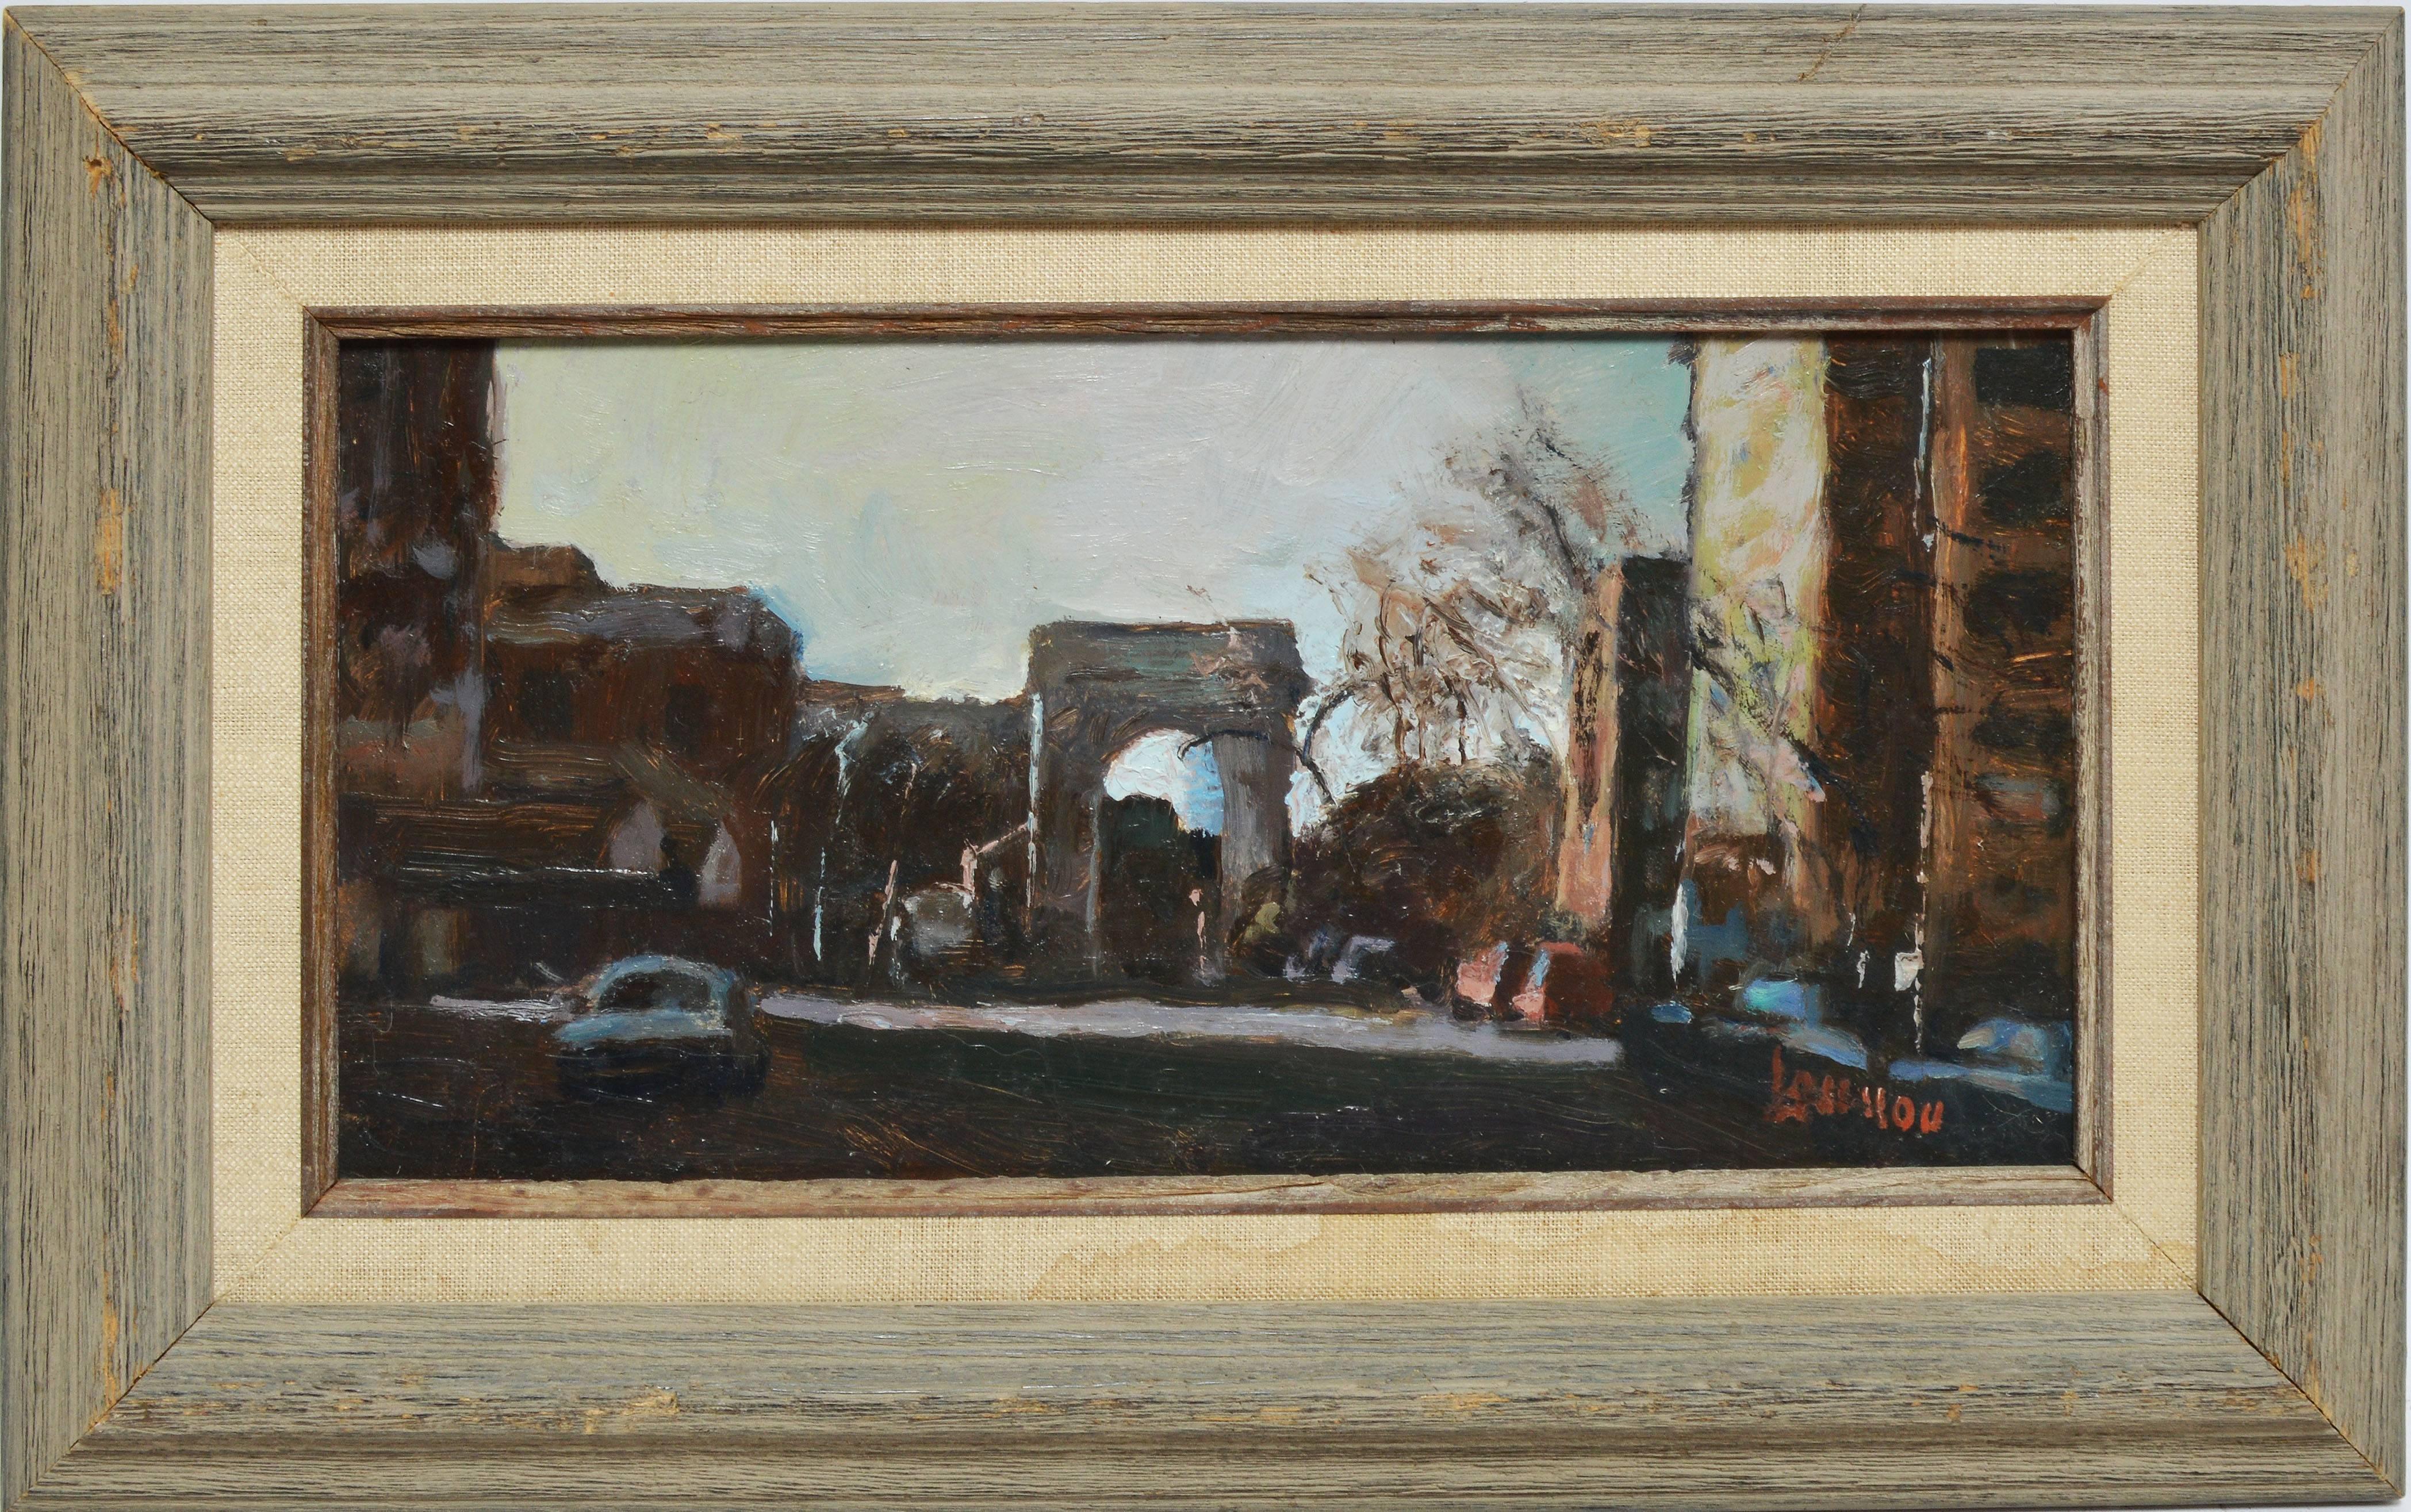 Impressionist view of New York City by Bernard Lennon (1914 - 1992). Oil on board, circa 1940. Signed lower right, "Lennon". Displayed in a giltwood frame. Image size, 12"L x 6"H., overall 16"L x 10"H.
